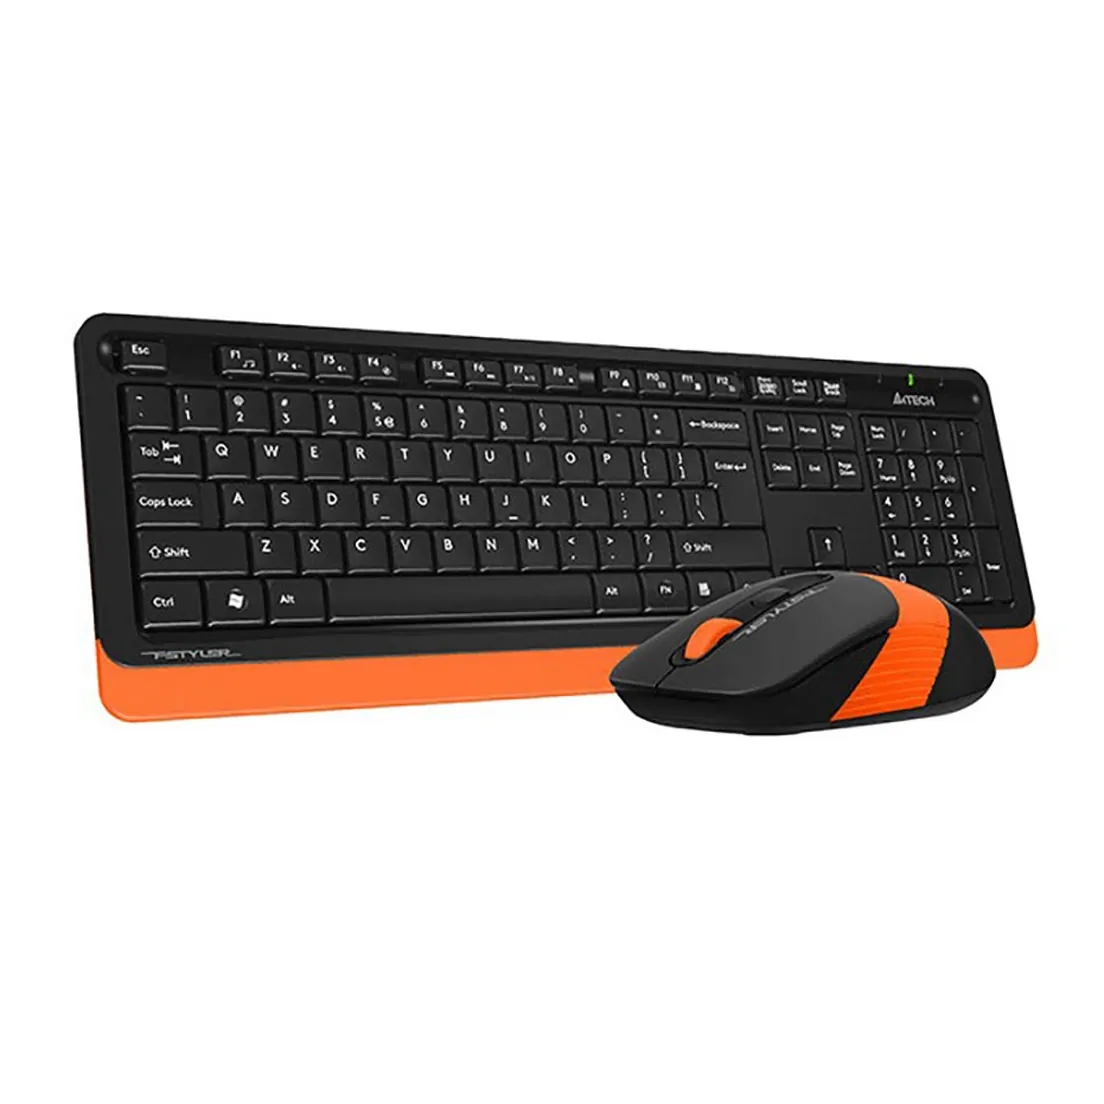 A4TECH FG1010 Wireless Keyboard Mouse Combo With Bangla – Orange Color